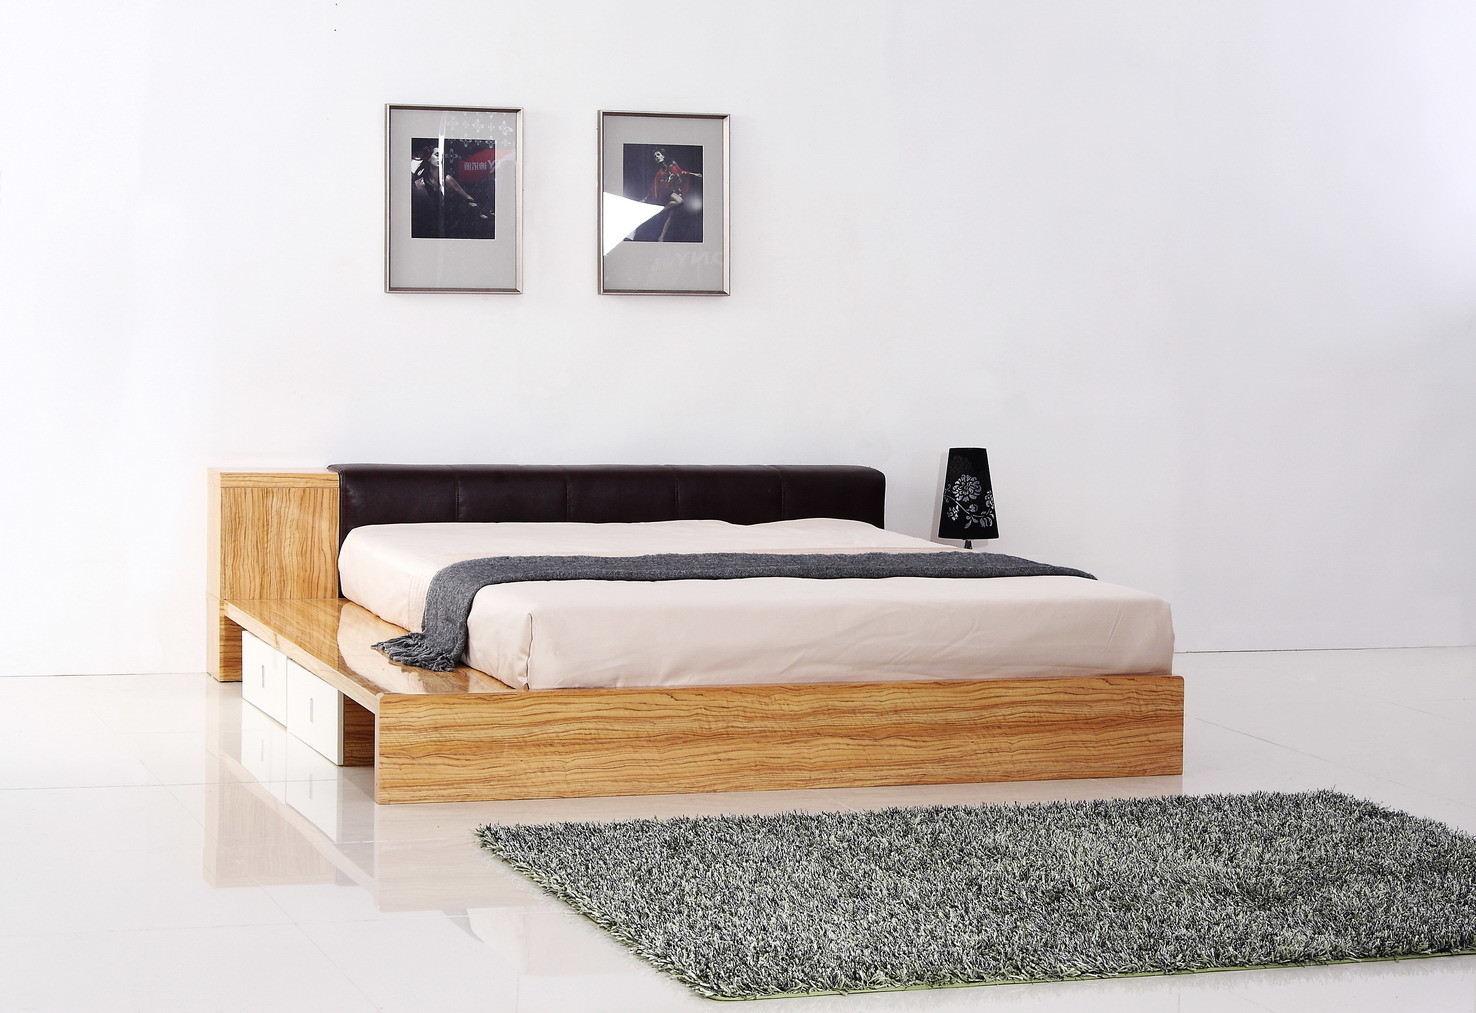  Modern bedroom furniture by MDF in glossy painting melamine board in bed shipping from China to UK and France Manufactures